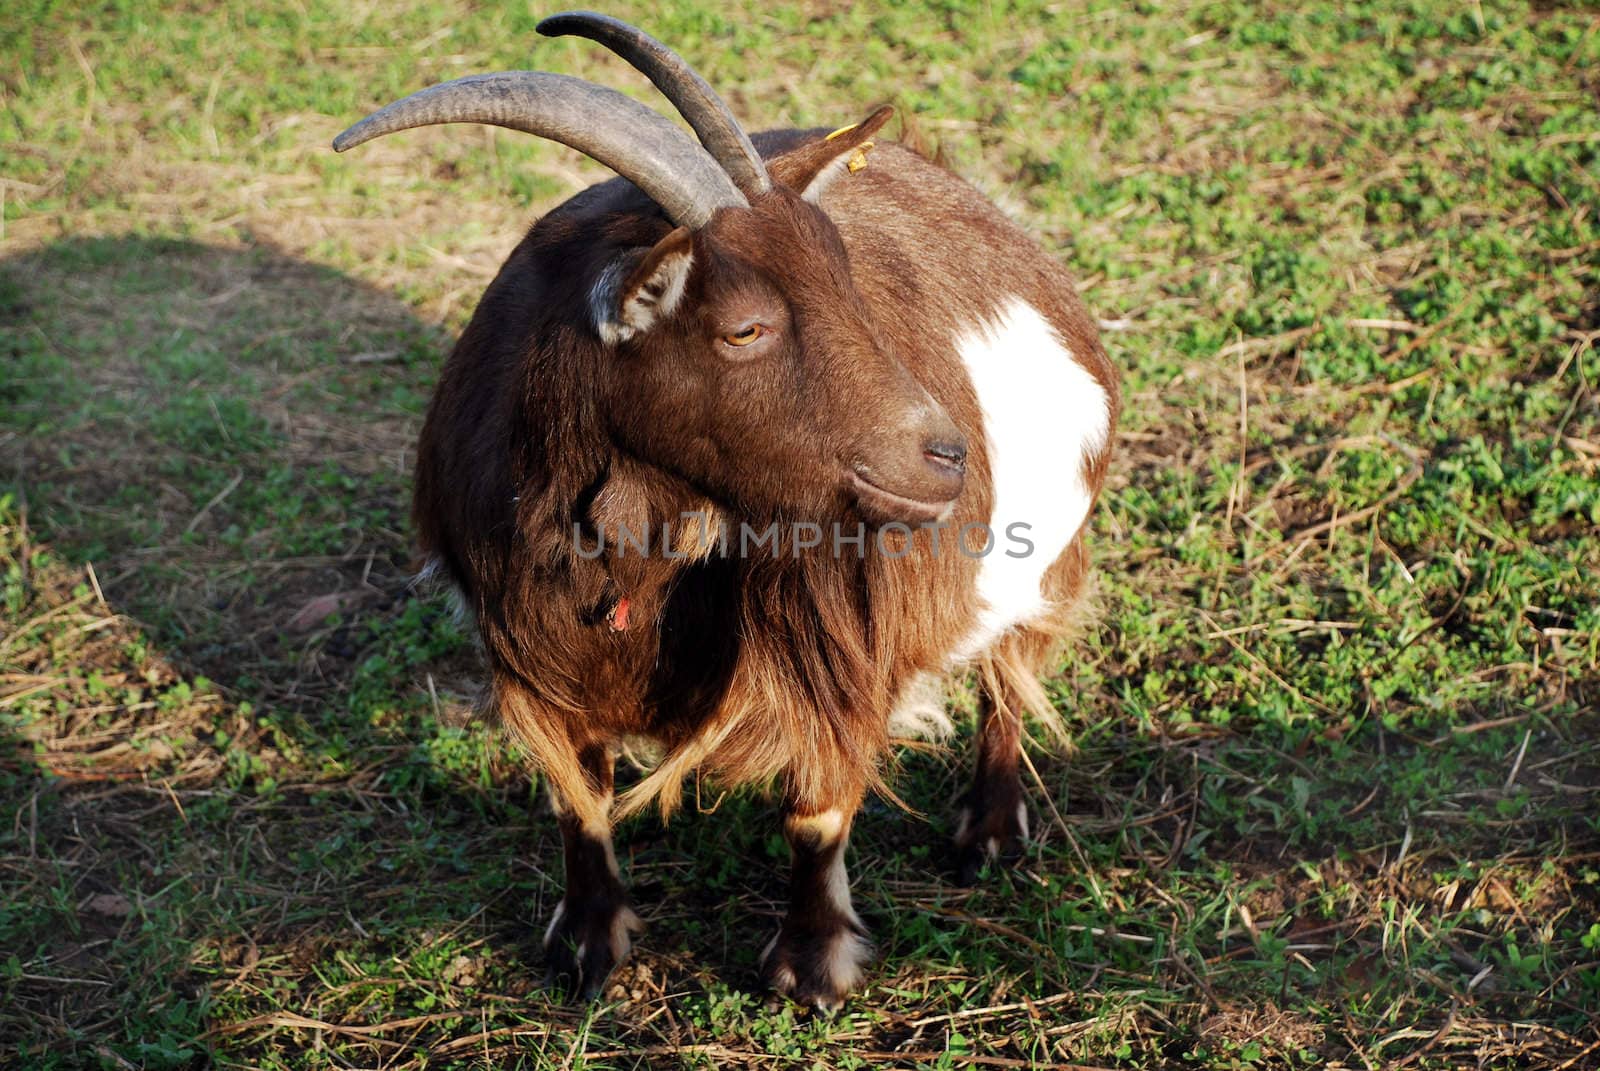 Large Horned Goat by pwillitts